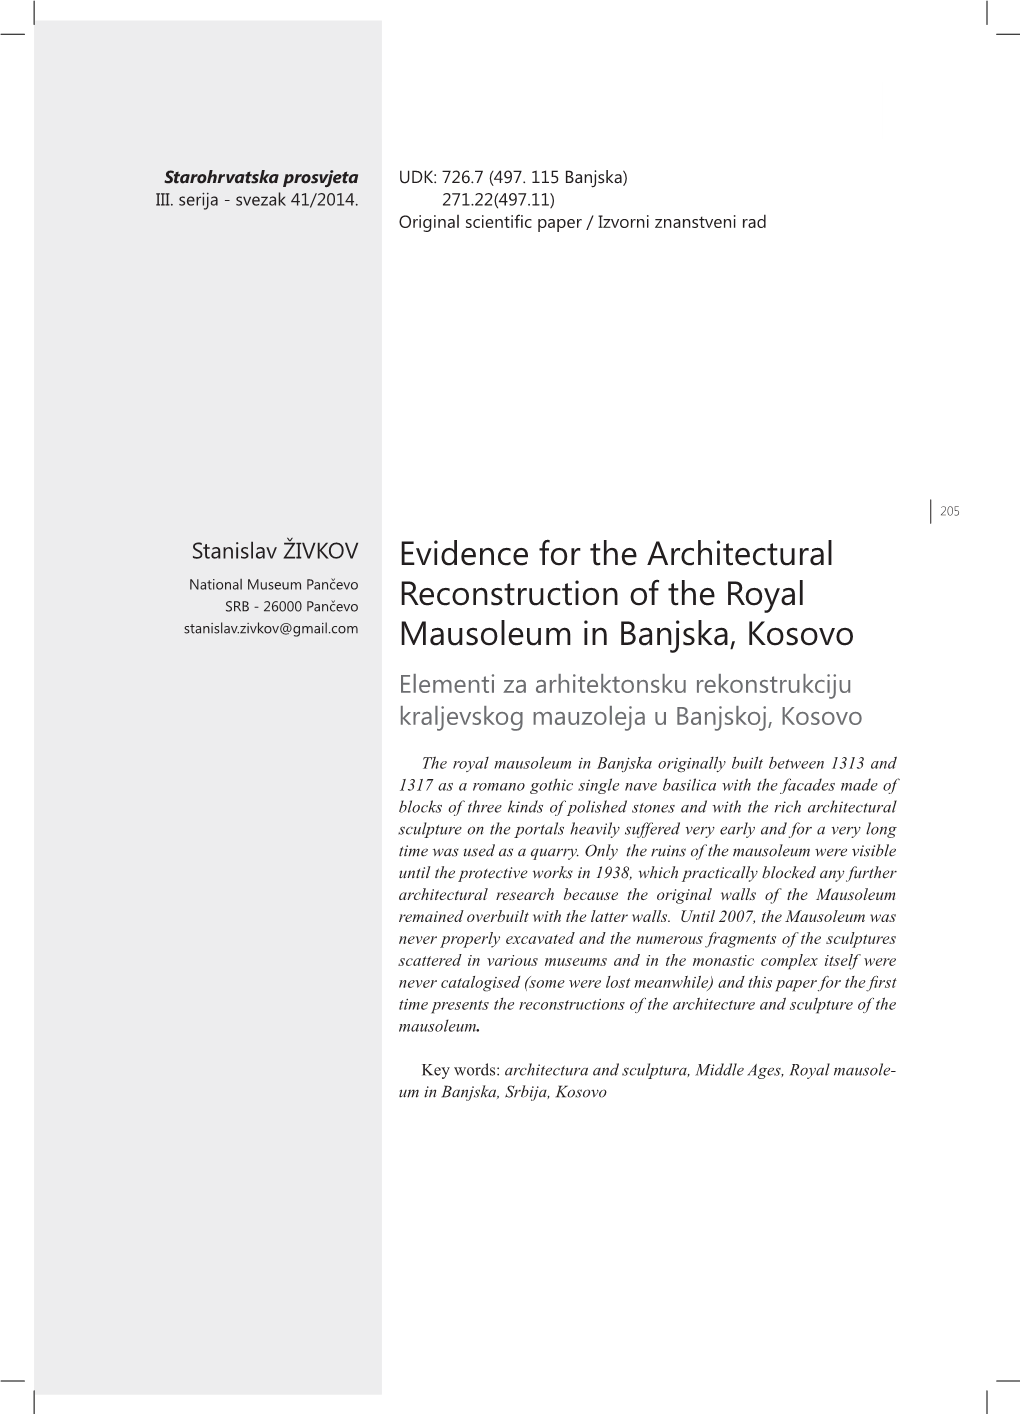 Evidence for the Architectural Reconstruction of the Royal Mausoleum in Banjska, Kosova